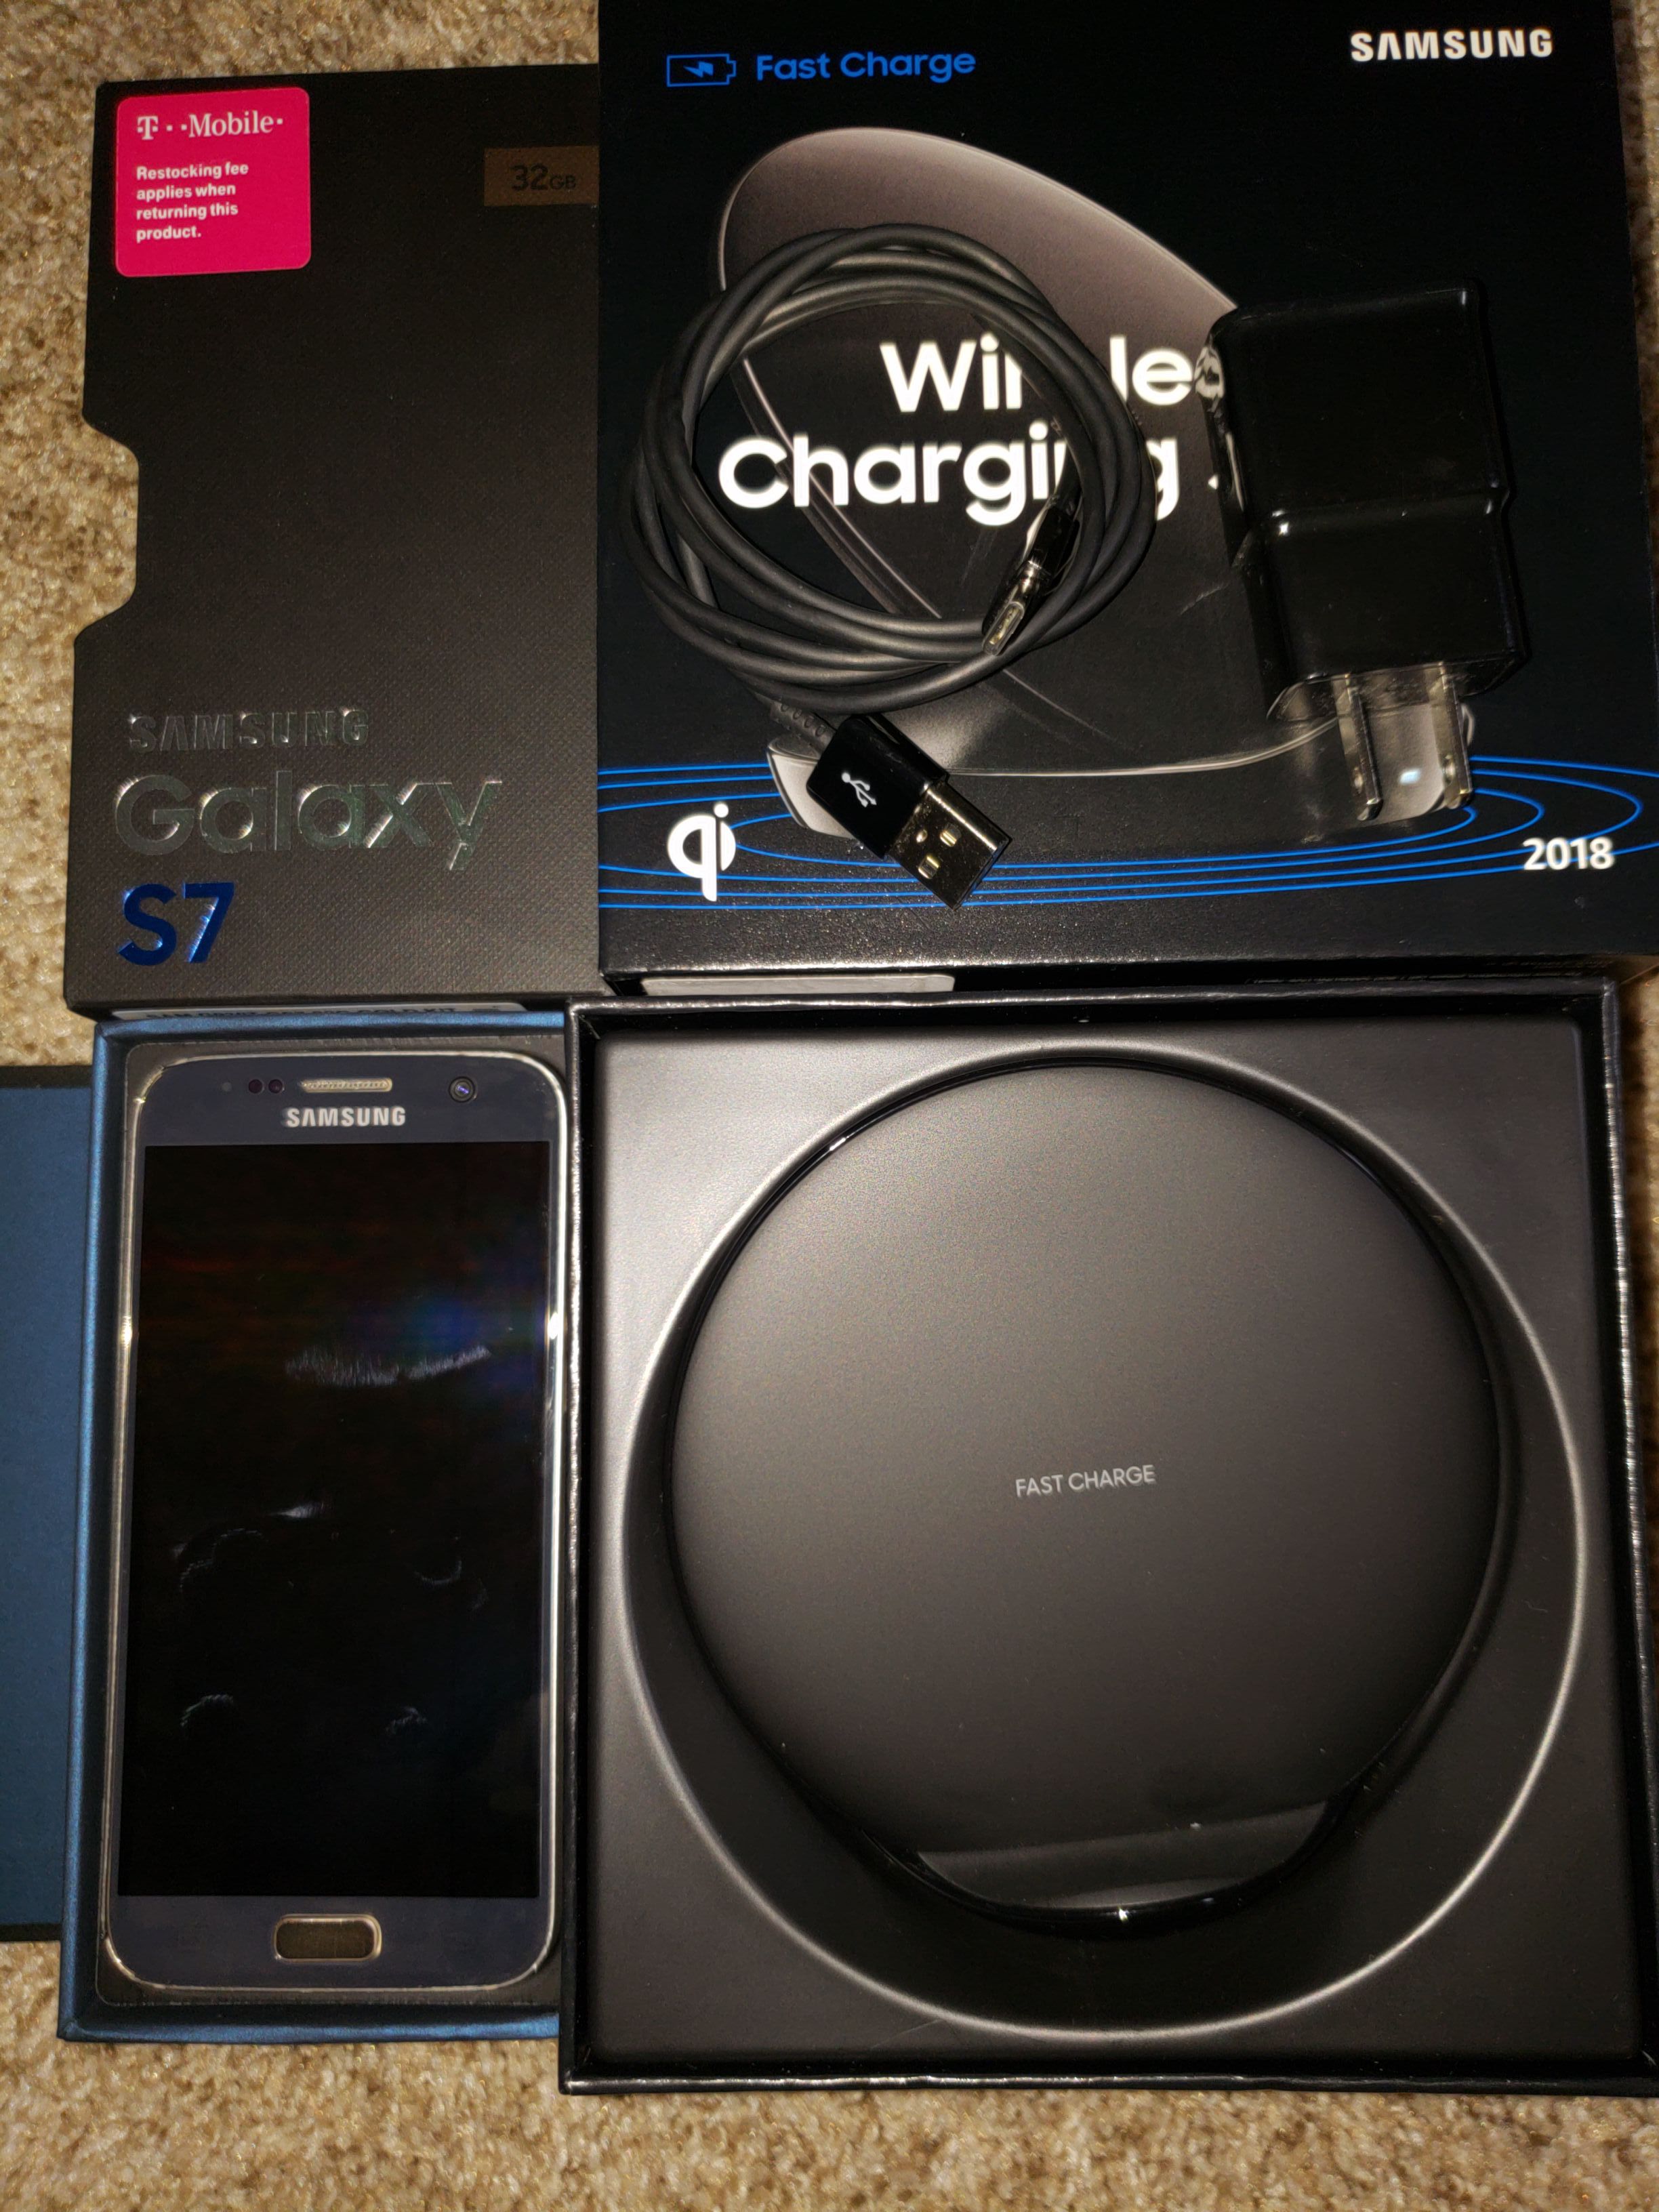 Samsung Galaxy s7 with wireless charger